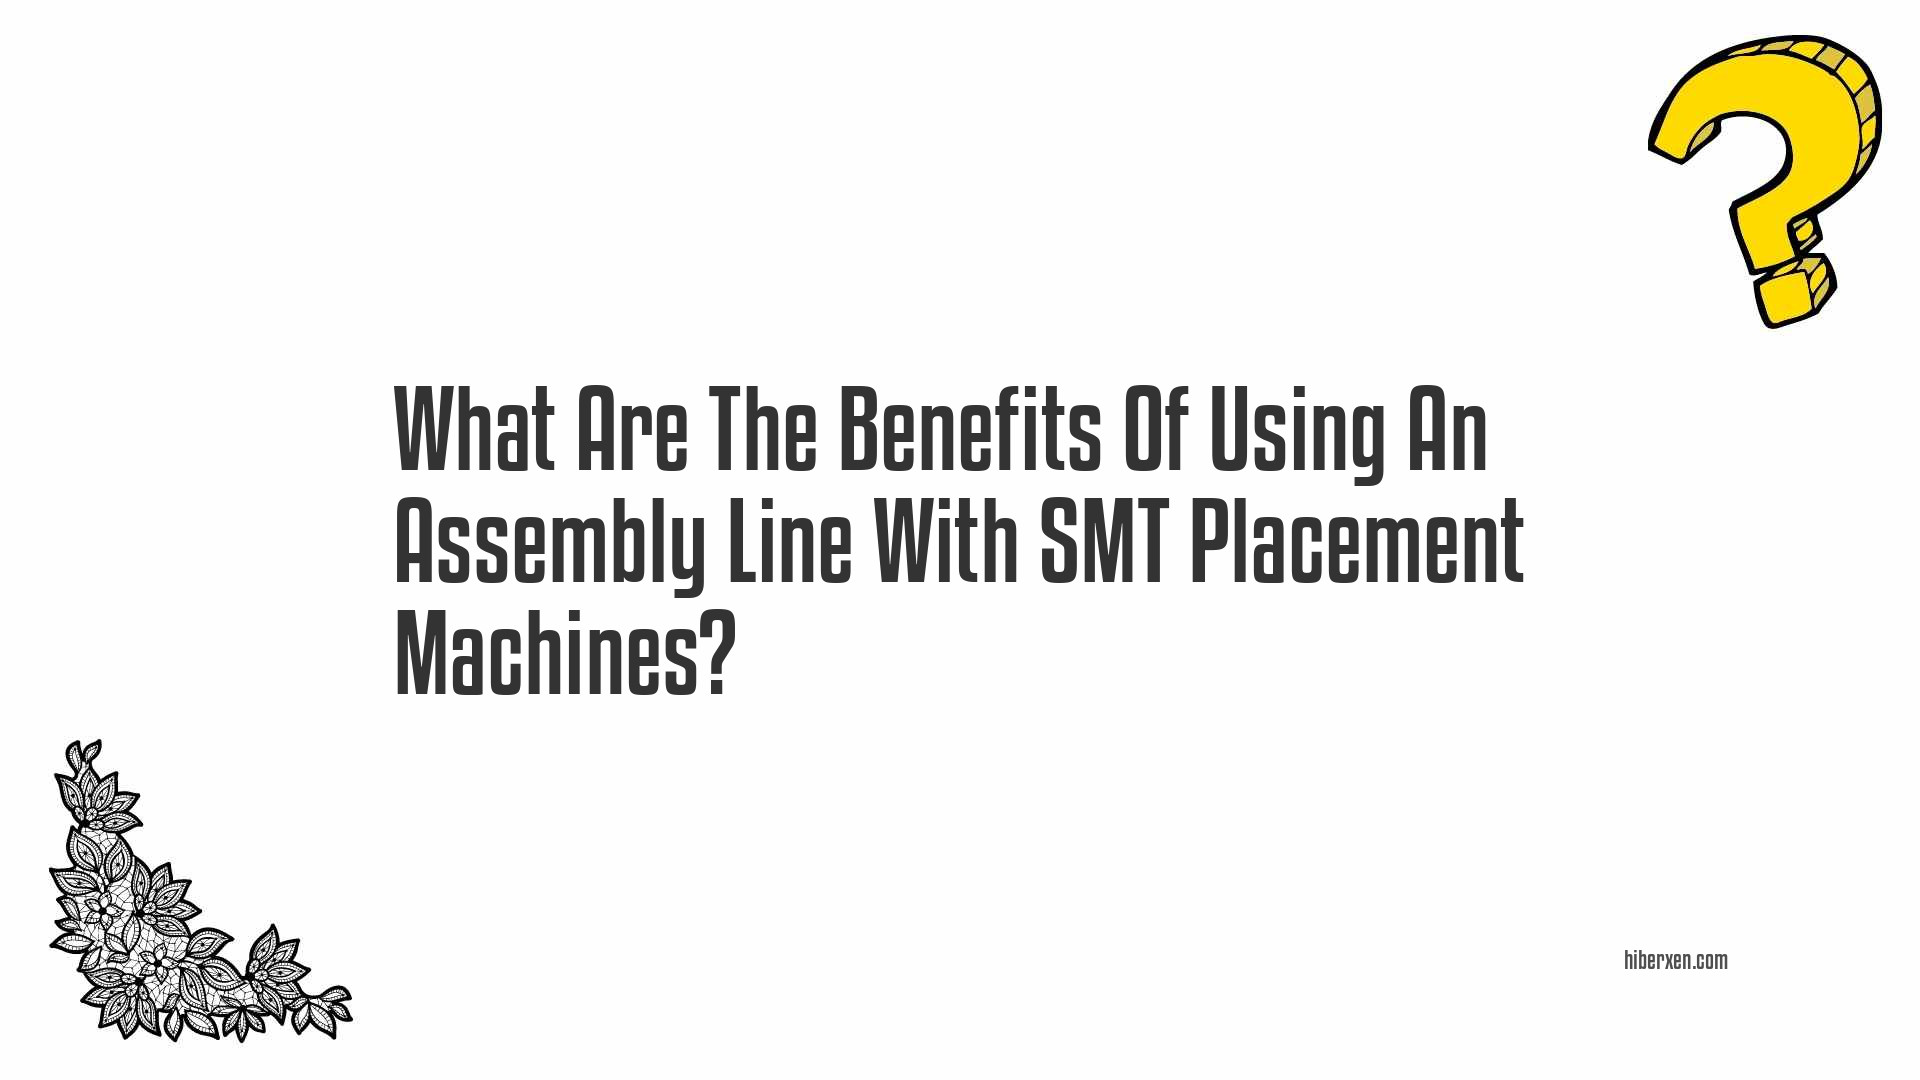 What Are The Benefits Of Using An Assembly Line With SMT Placement Machines?